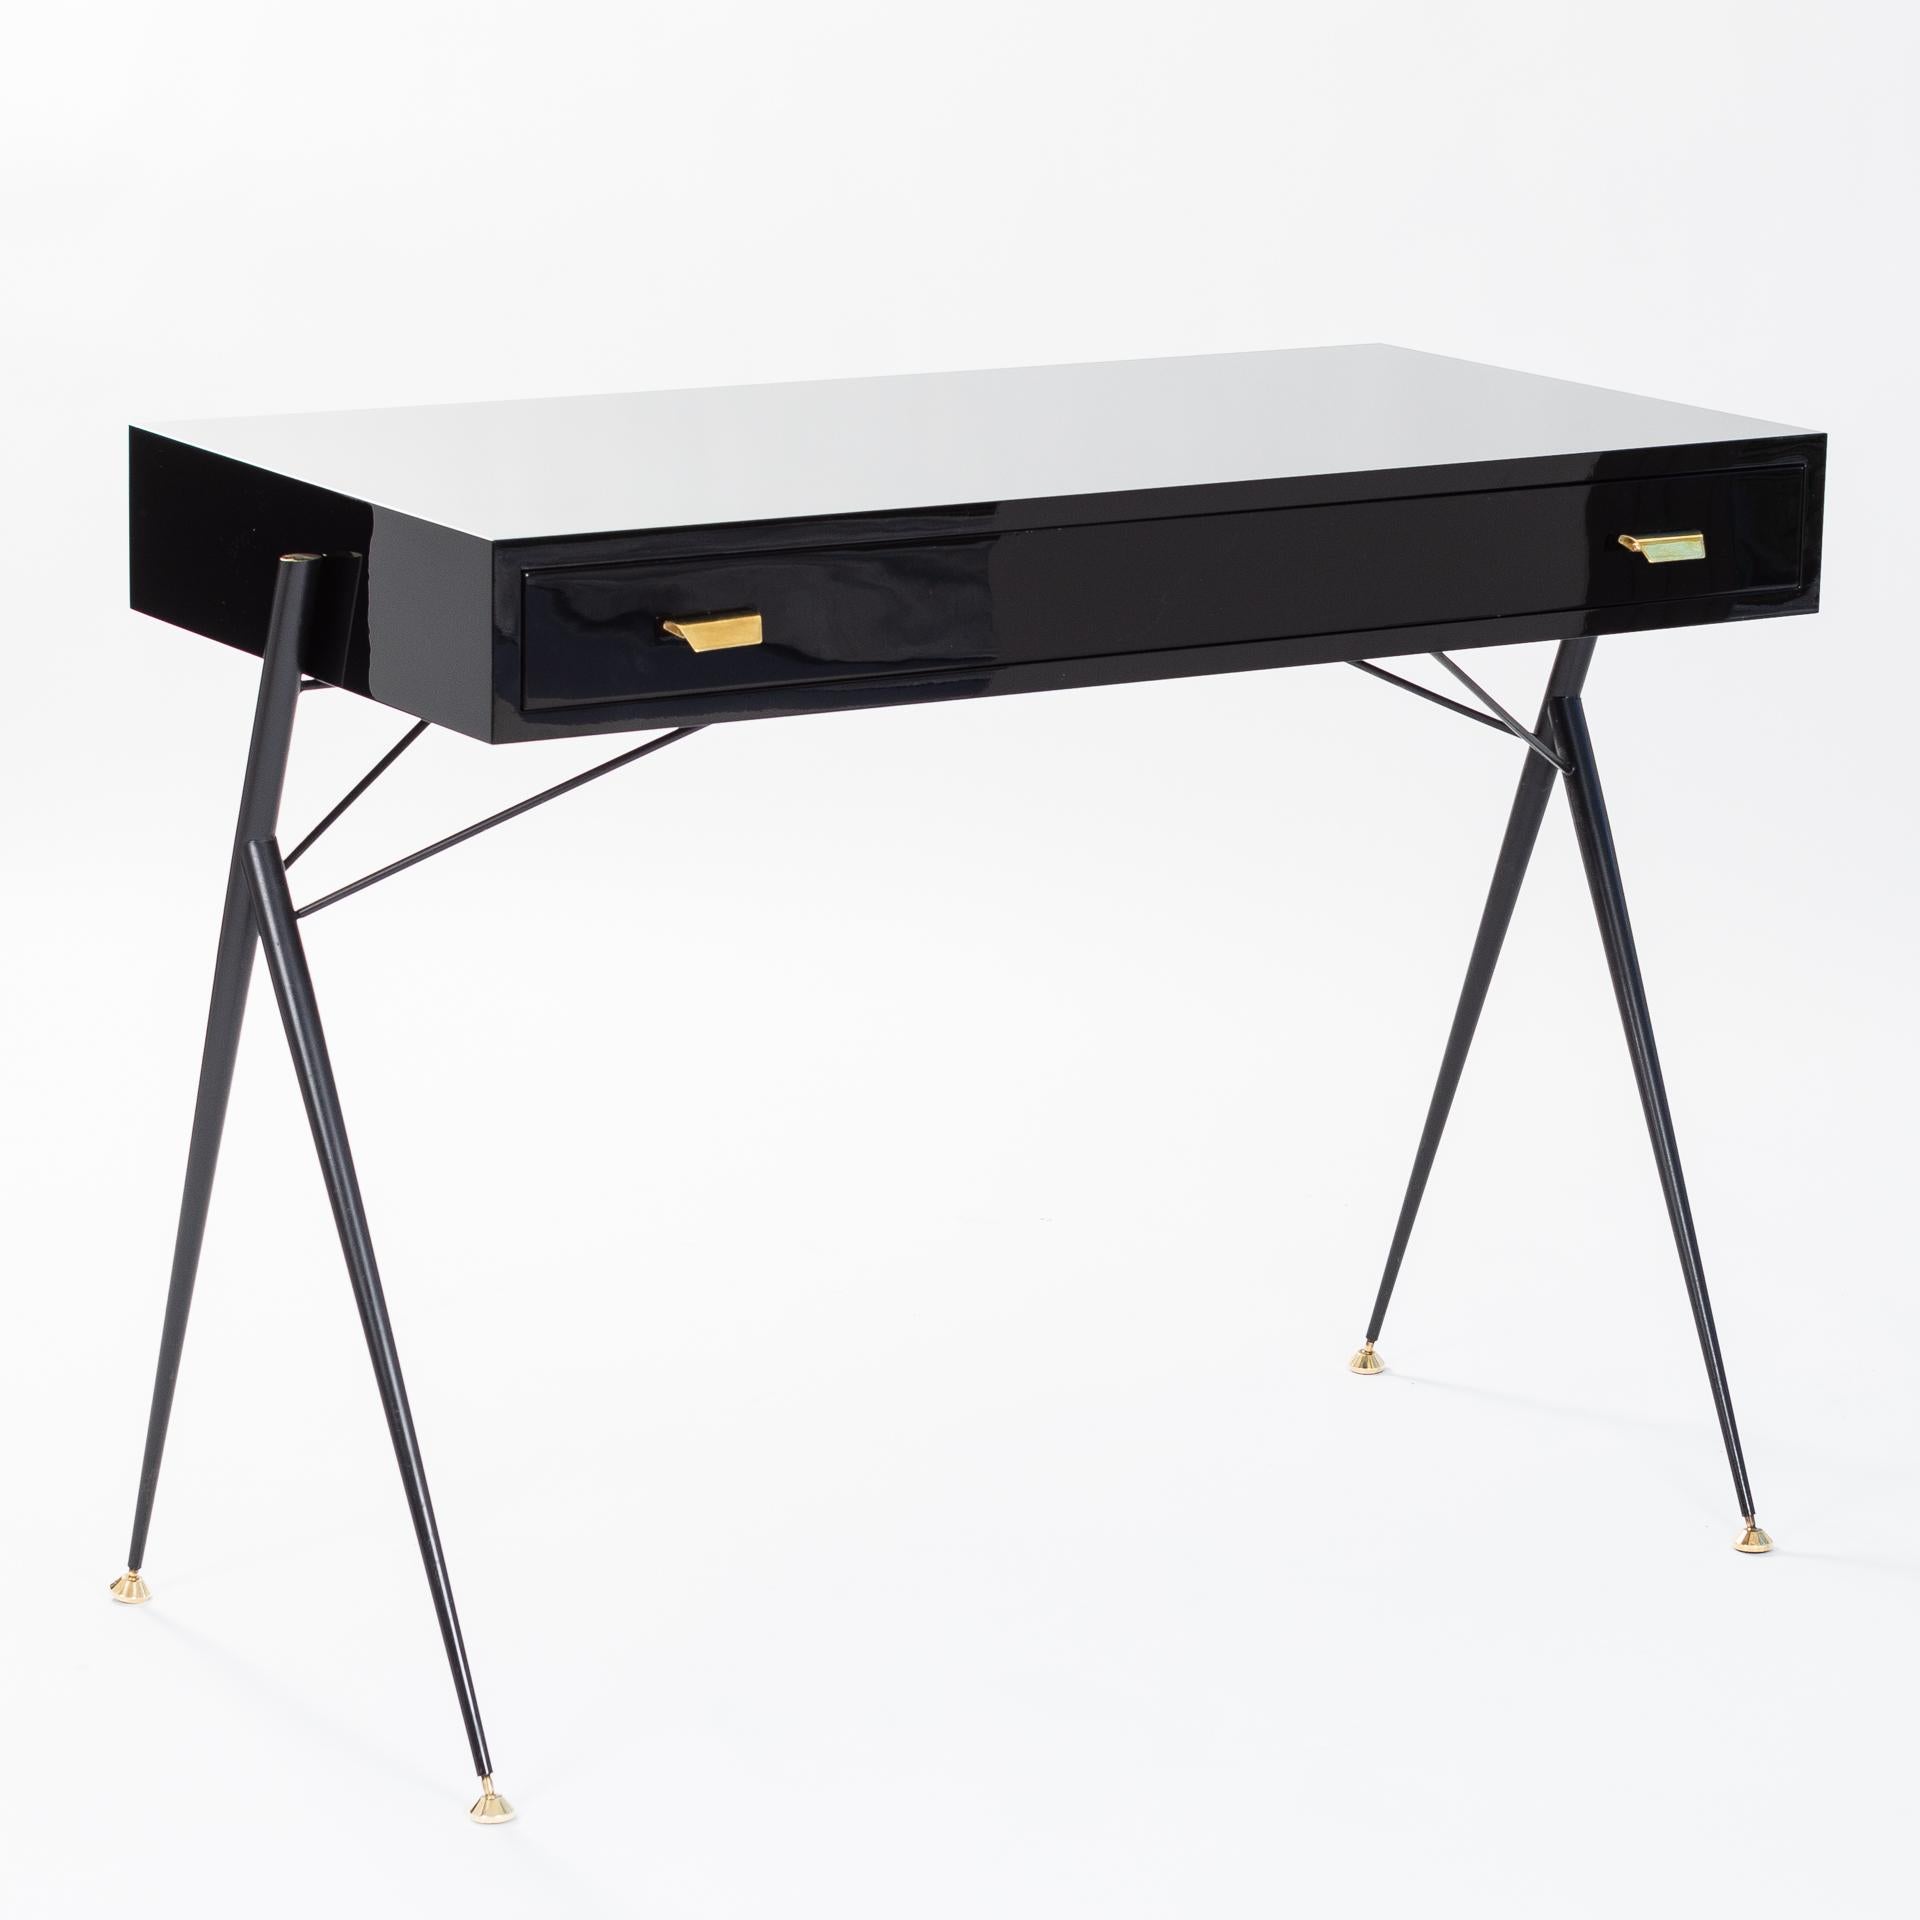 Small desk by Silvio Cavatorta, Italy, 1950s.
Re-painted in black high-gloss lacquer.
Stainless steel base powder-coated in black, fine brass details.
Height-adjustable foot sections
Freely adjustable.